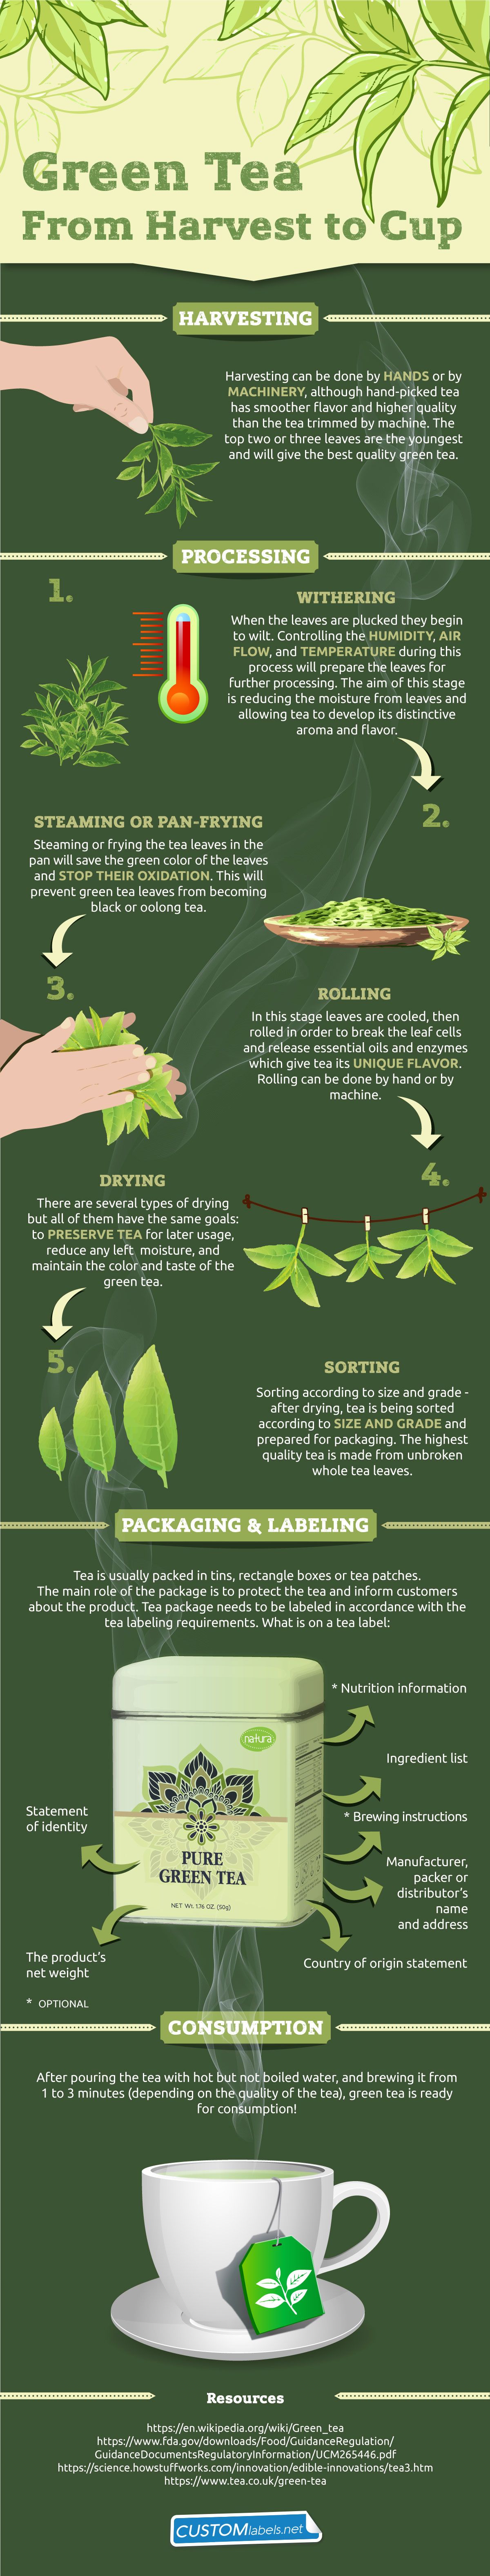 Green Tea Production Journey - From Harvest To Cup Infographic